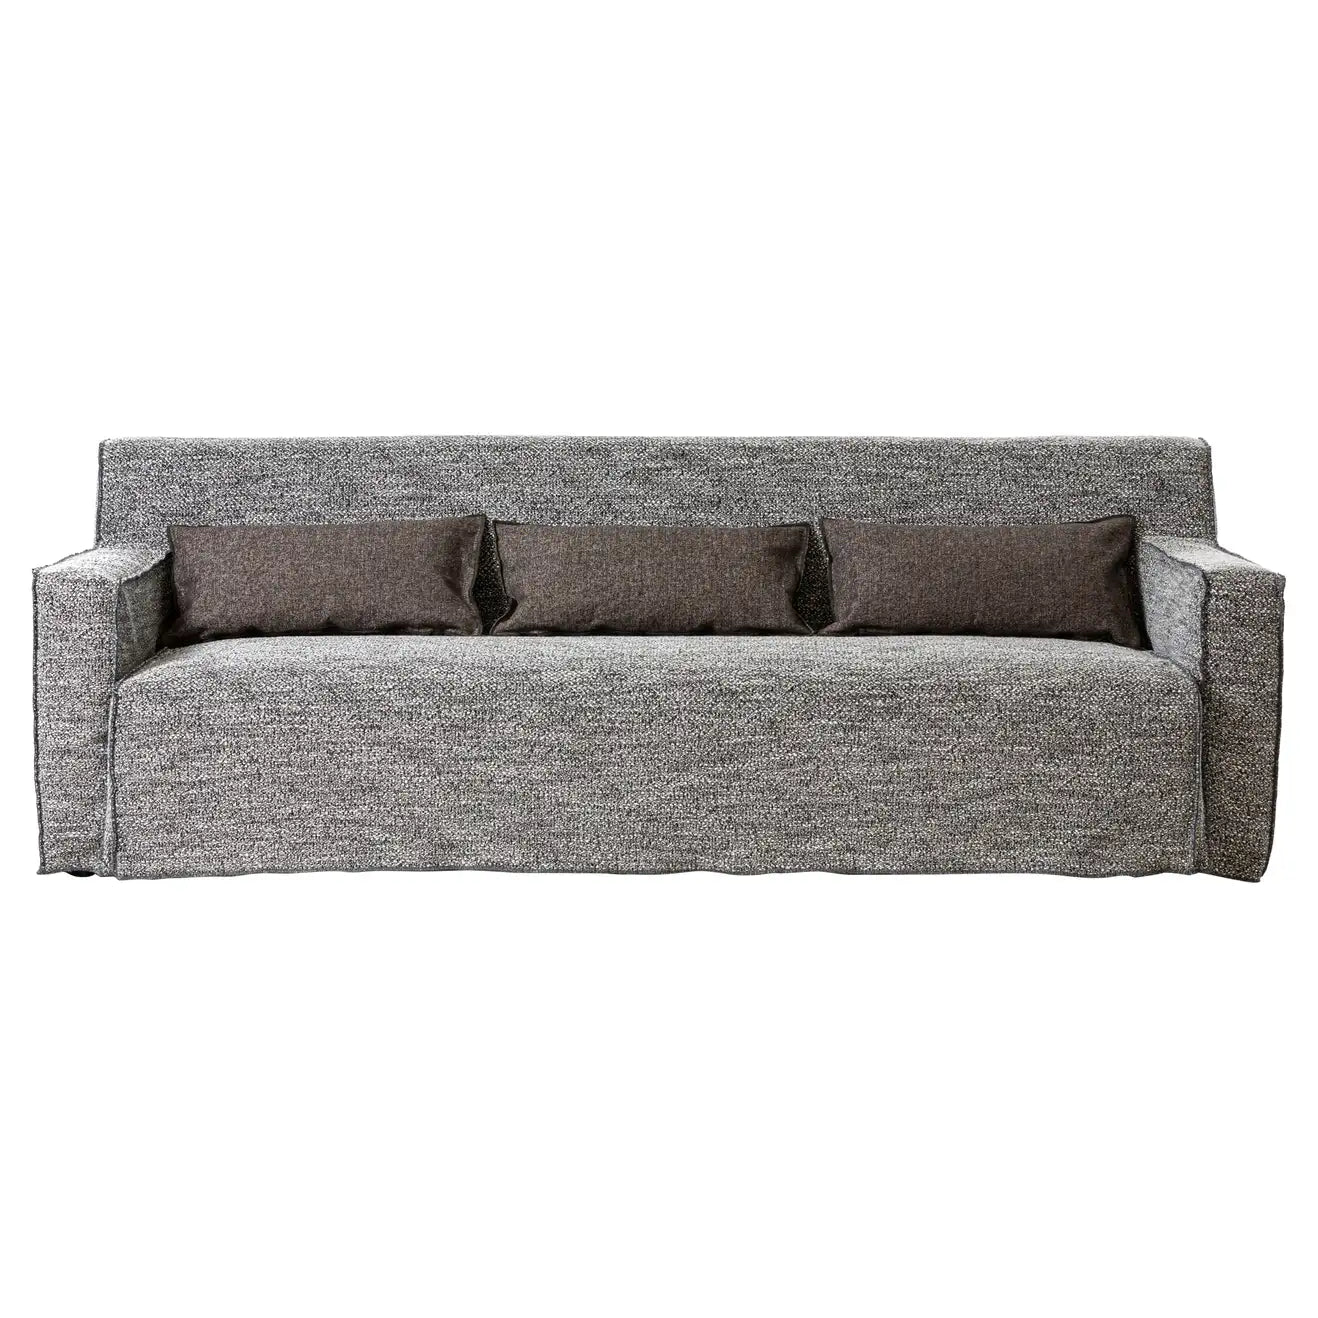 Gervasoni More 12 Sofa in Rhino Upholstery by Paola Navone $5,800.00